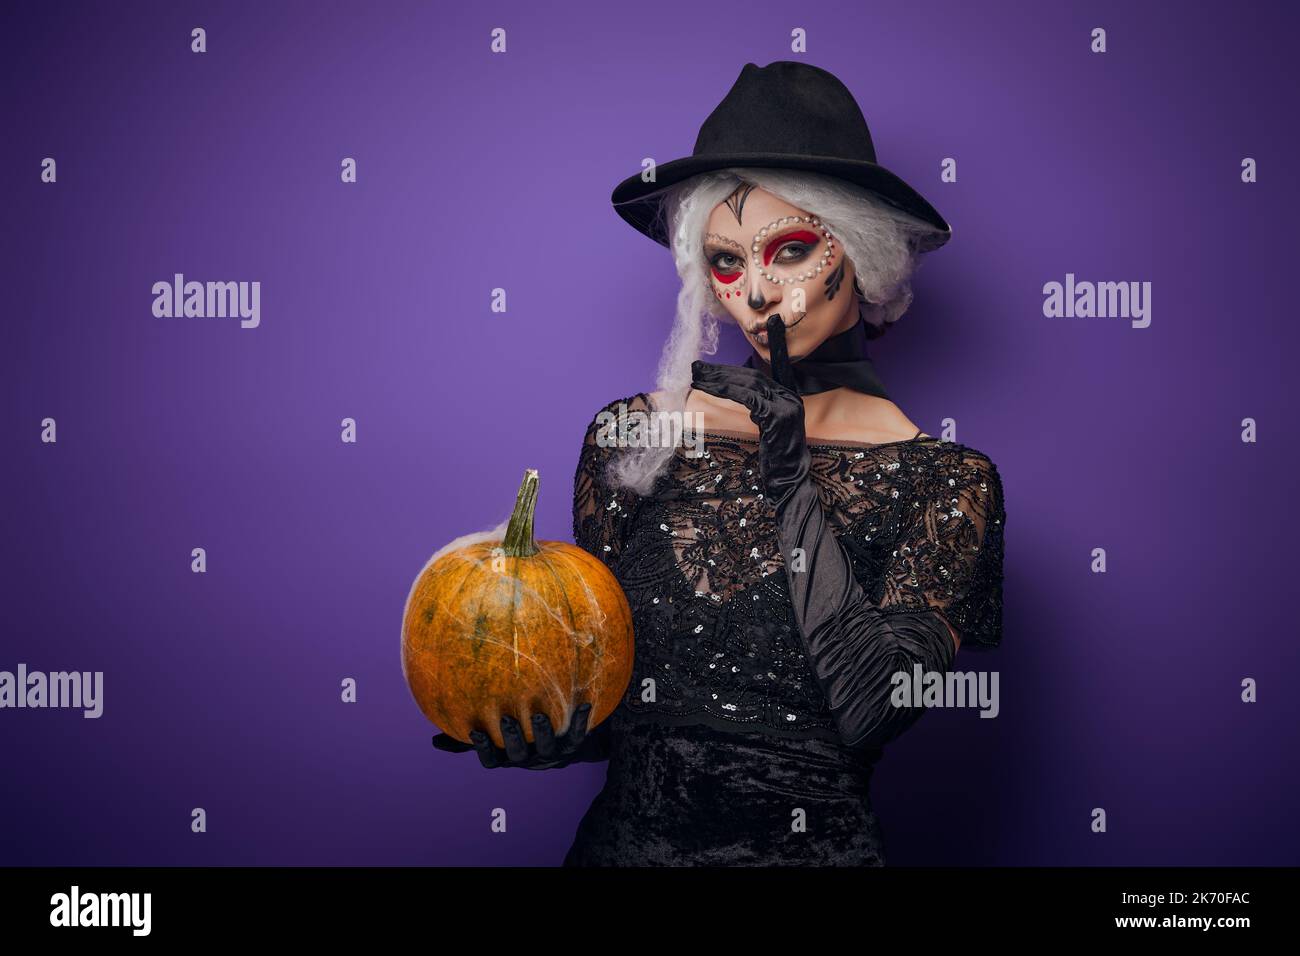 Witch with grey hair whispering in Halloween costume Stock Photo